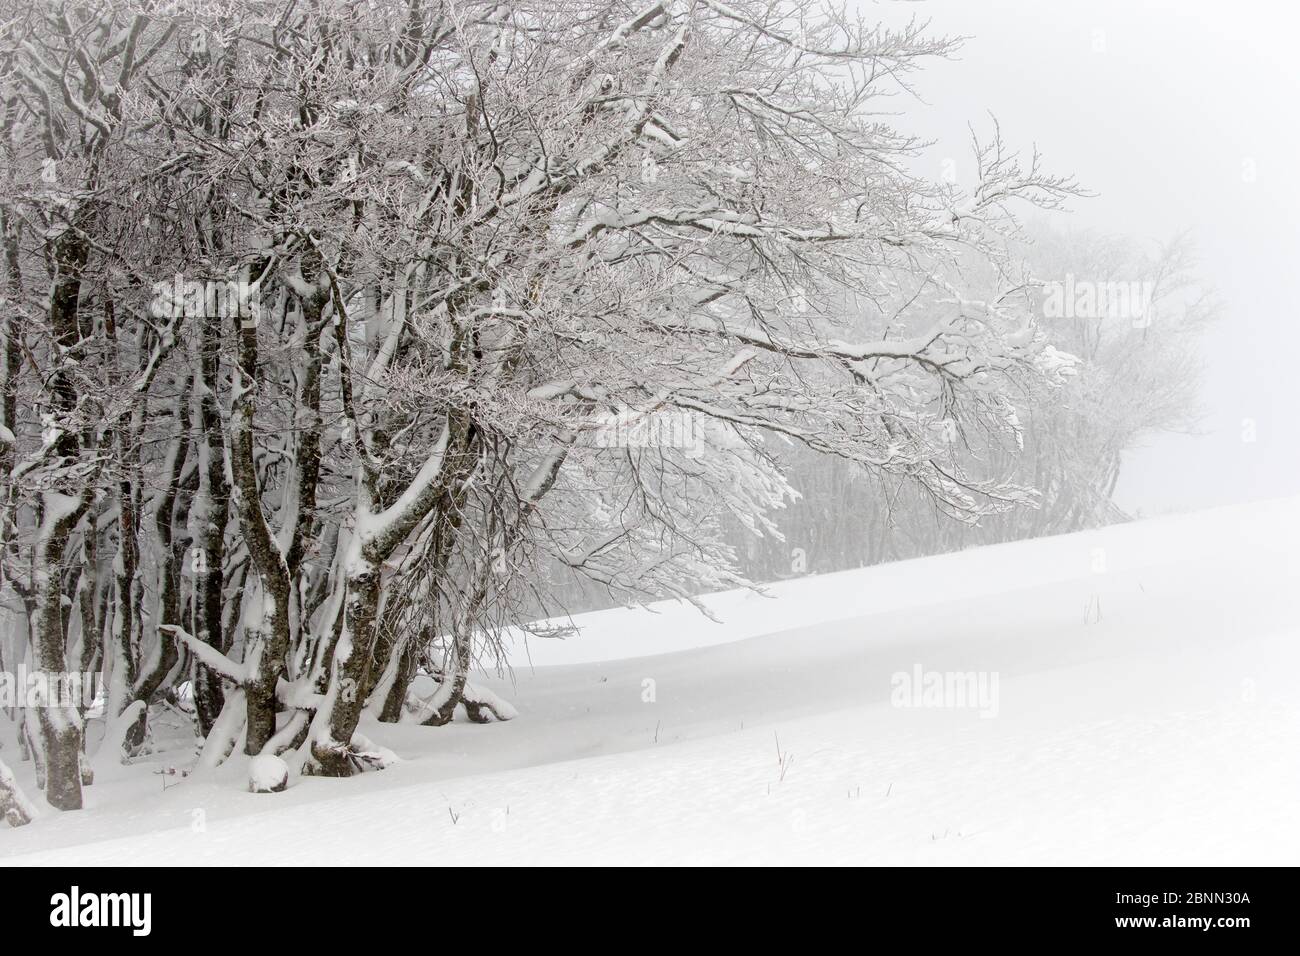 European / Common beech tree (Fagus sylvatica)trees covered in snow, Hohneck, Vosges, France, January Stock Photo